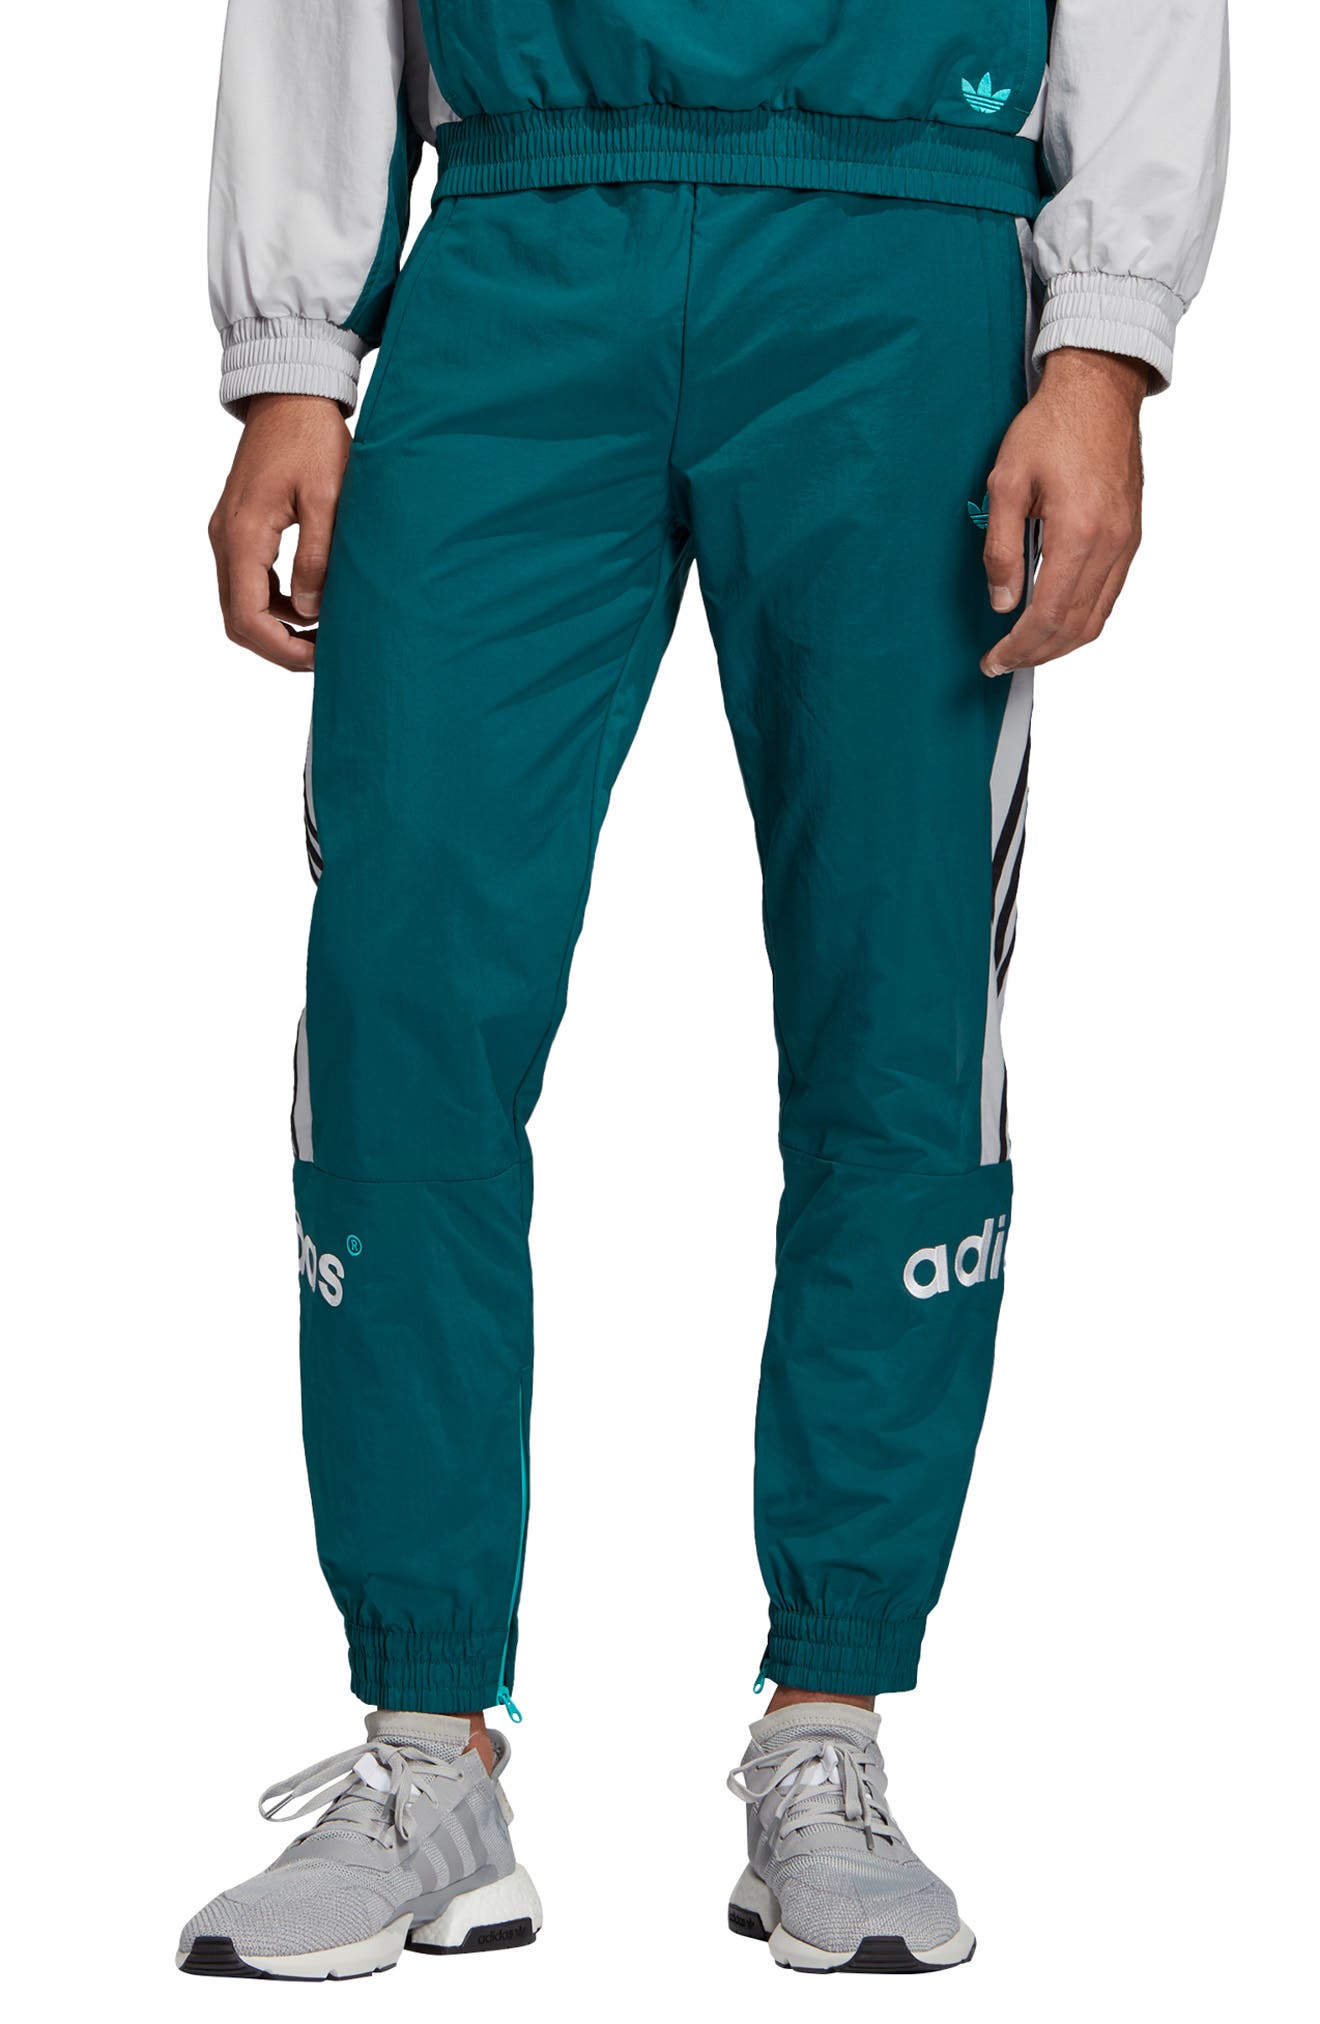 adidas archive track pants